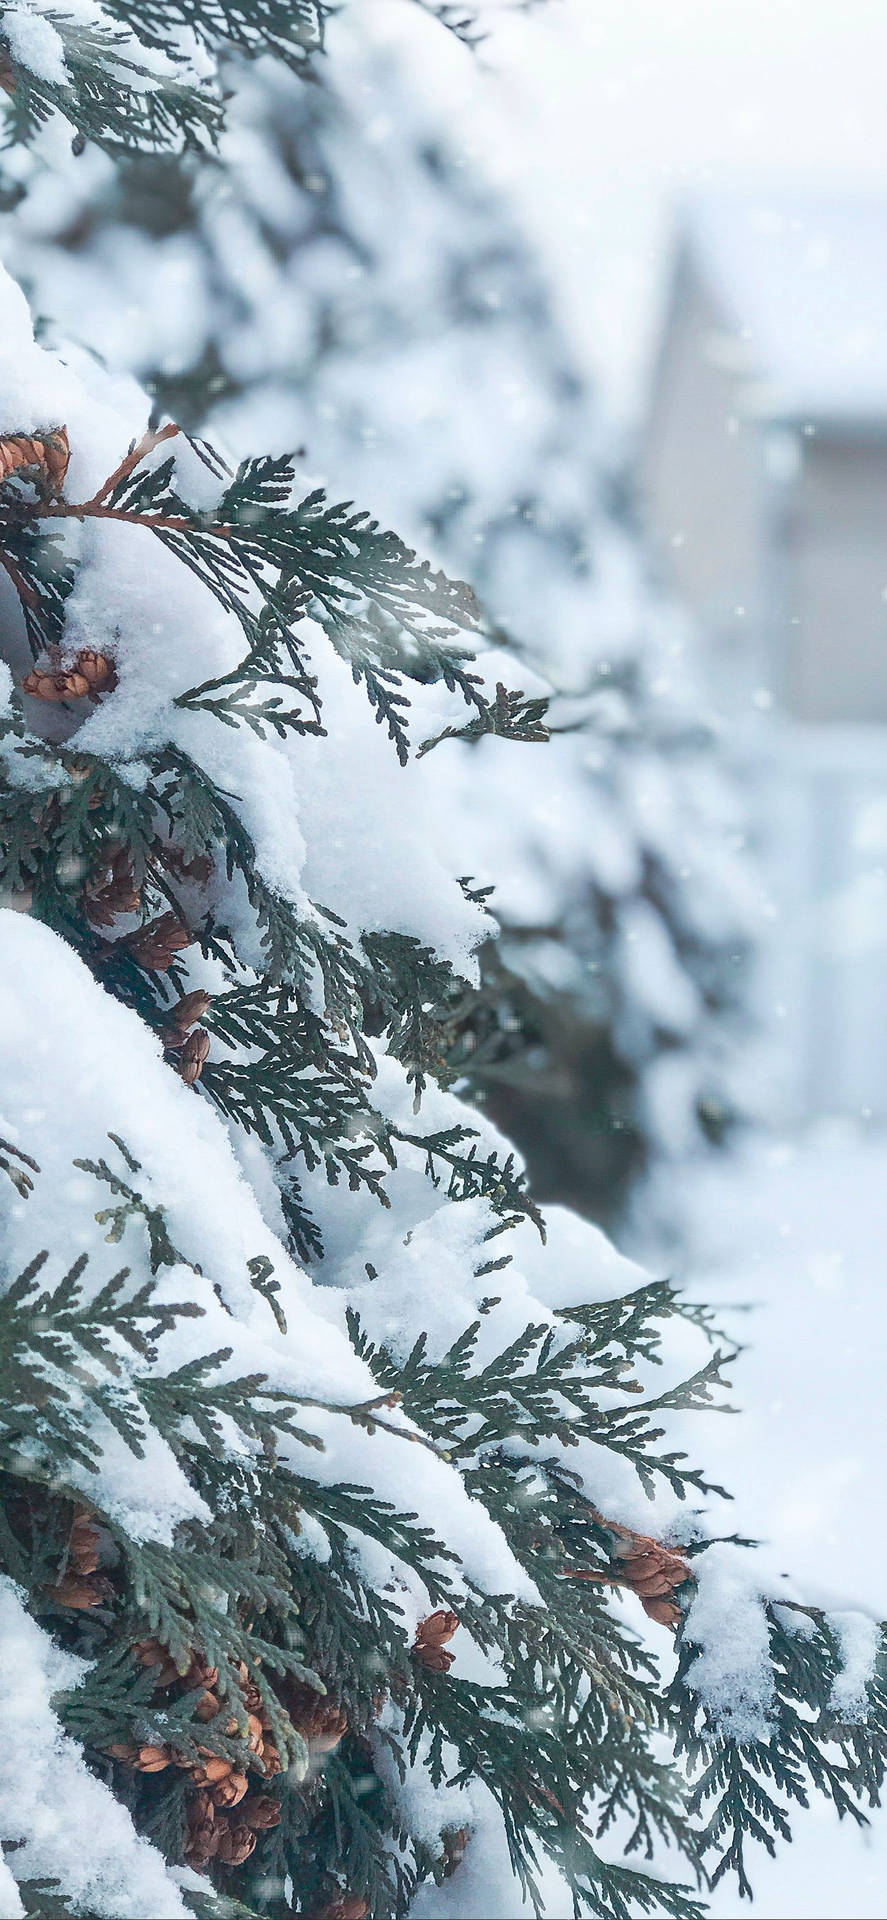 Image  "A Snowy Winter Christmas" Wallpaper